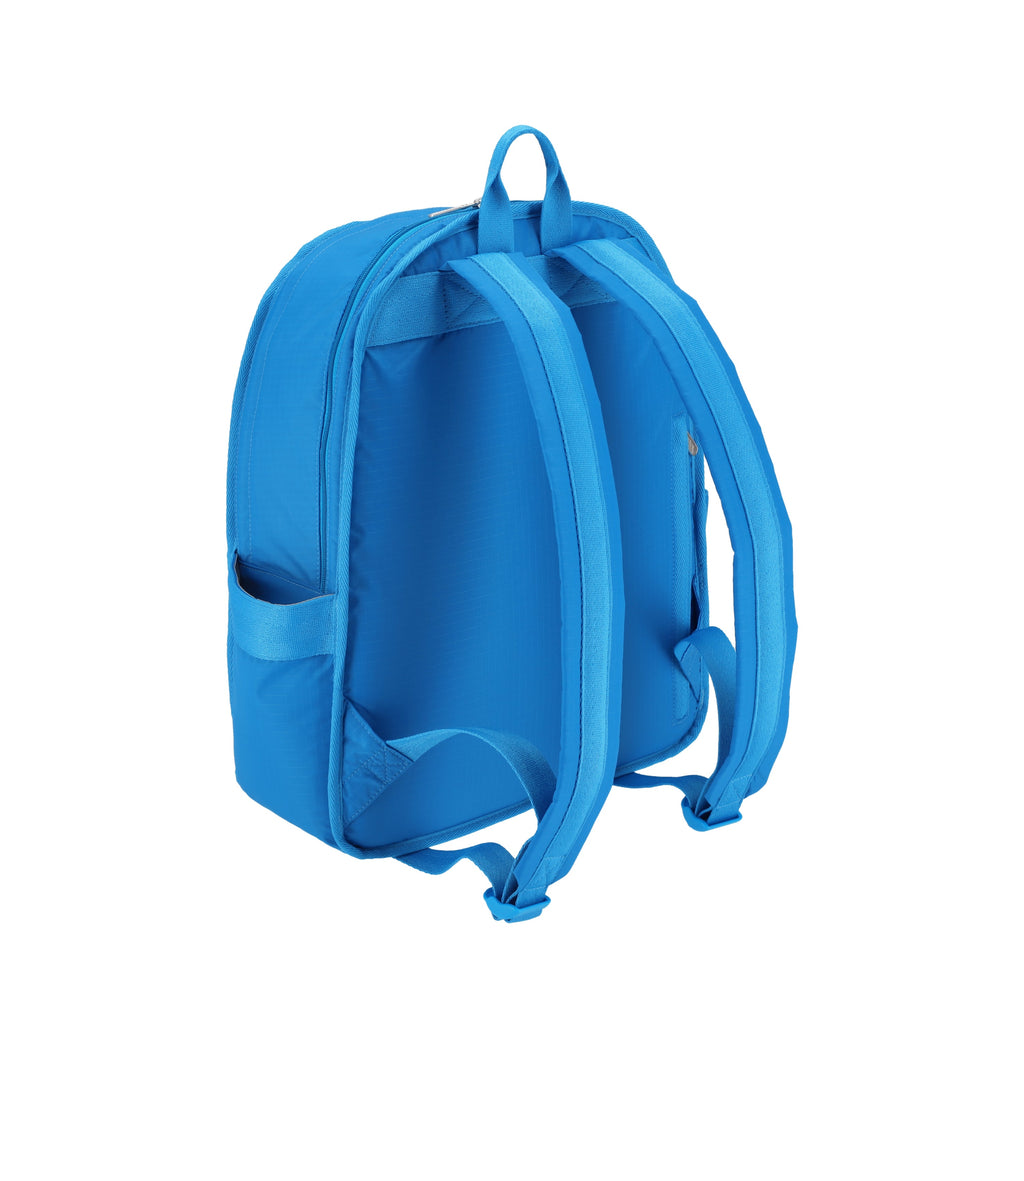 Route Backpack - 24737025884208